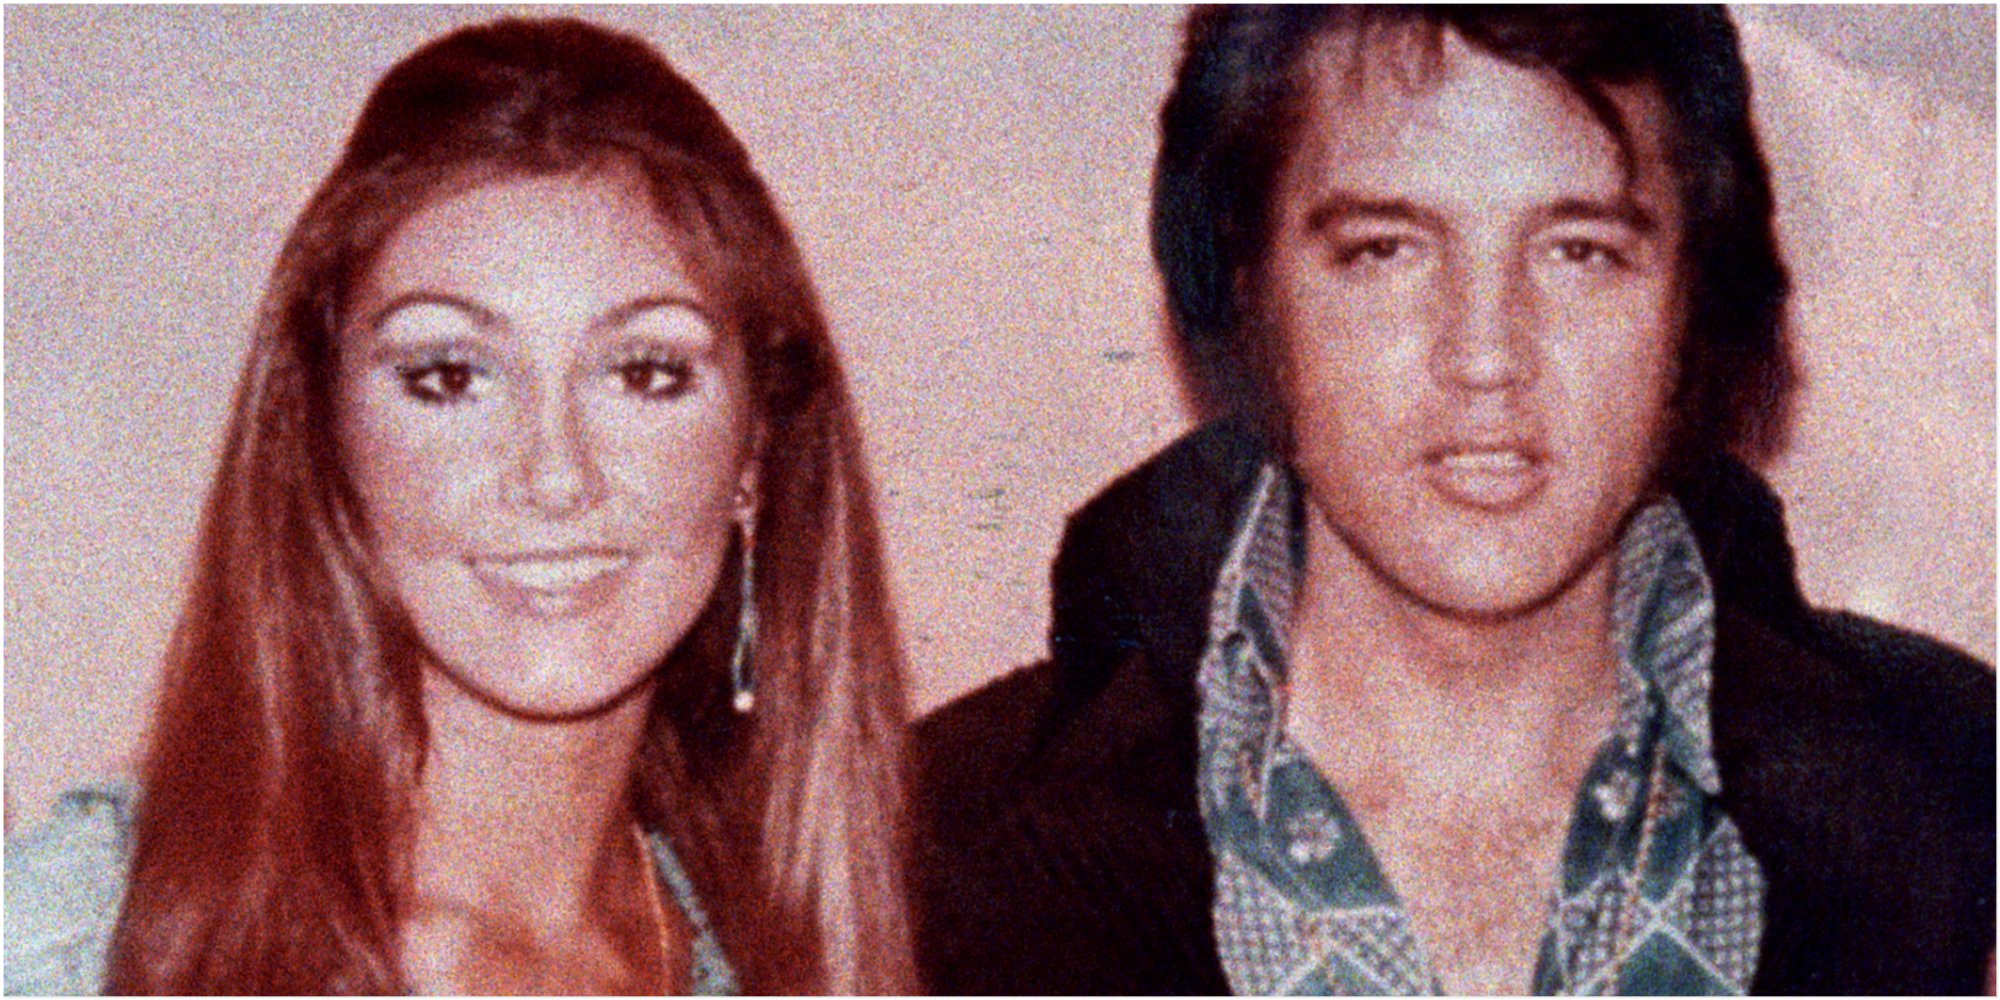 Linda Thompson and Elvis Presley pose together in a photograph taken in the early 1970s.